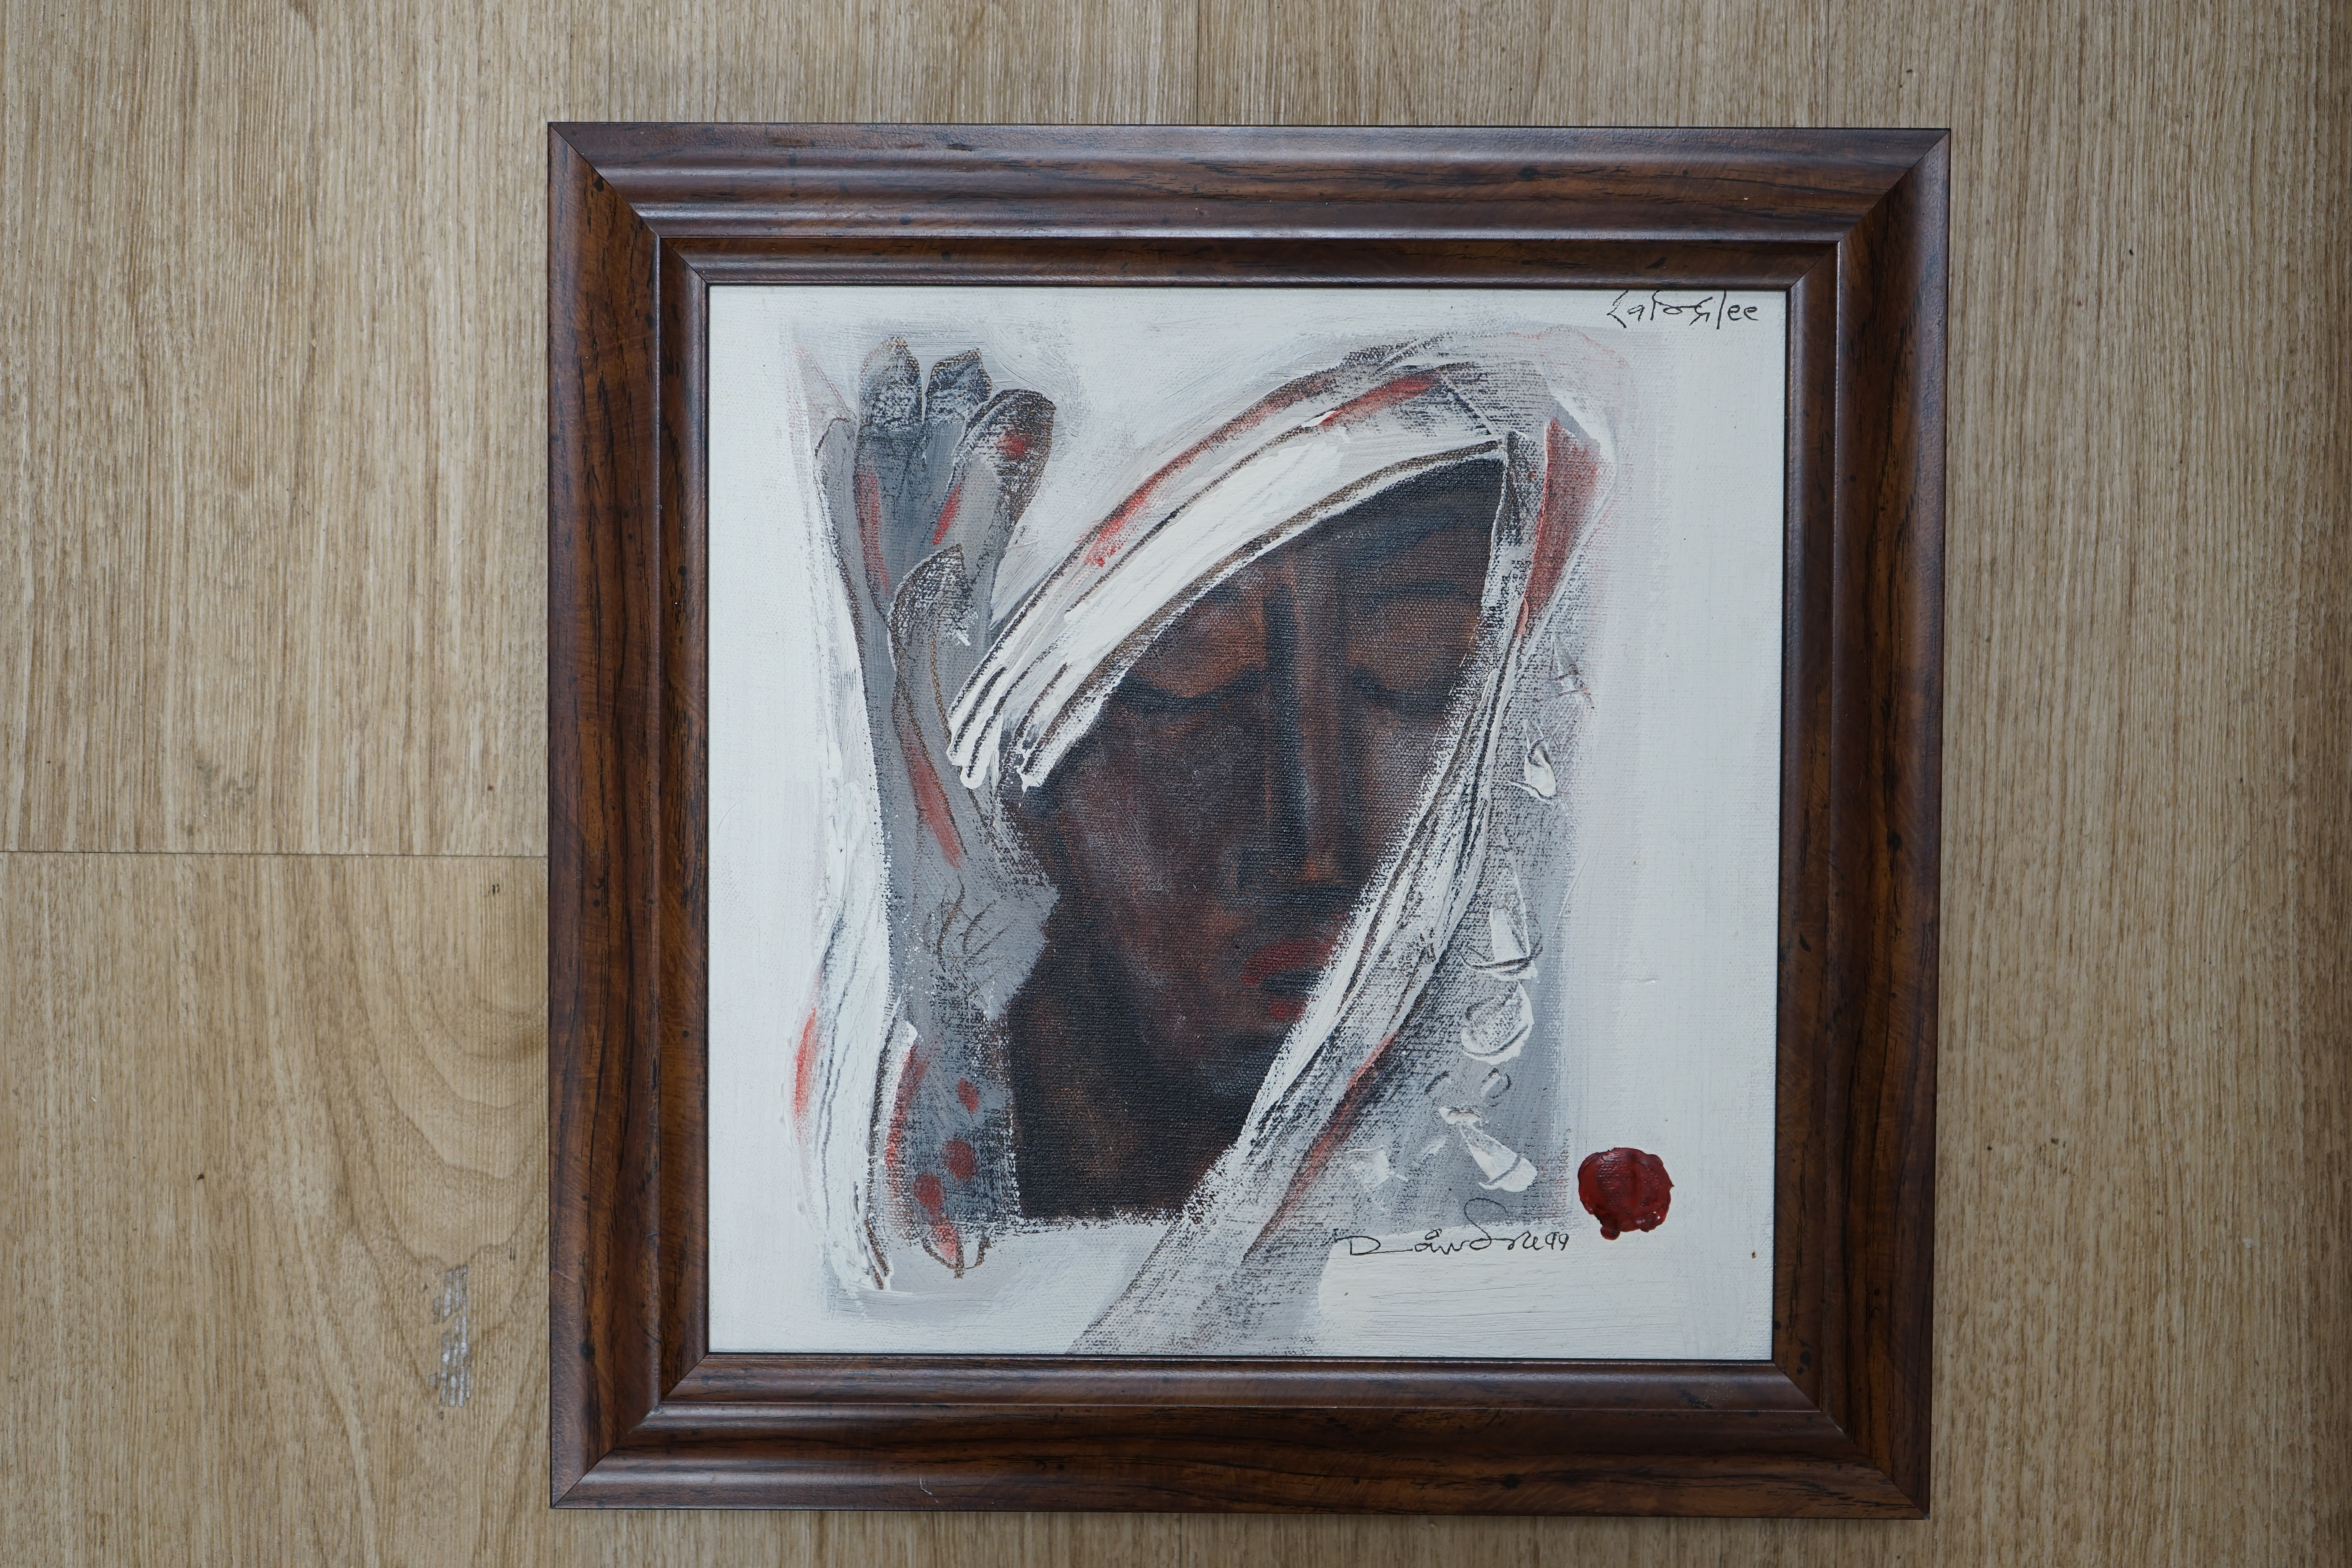 Indian School, oil on canvas, Portrait, various inscriptions verso including ‘Ravindra's Mumbai’, indistinctly signed and dated ‘99, 29 x 29cm. Condition - good